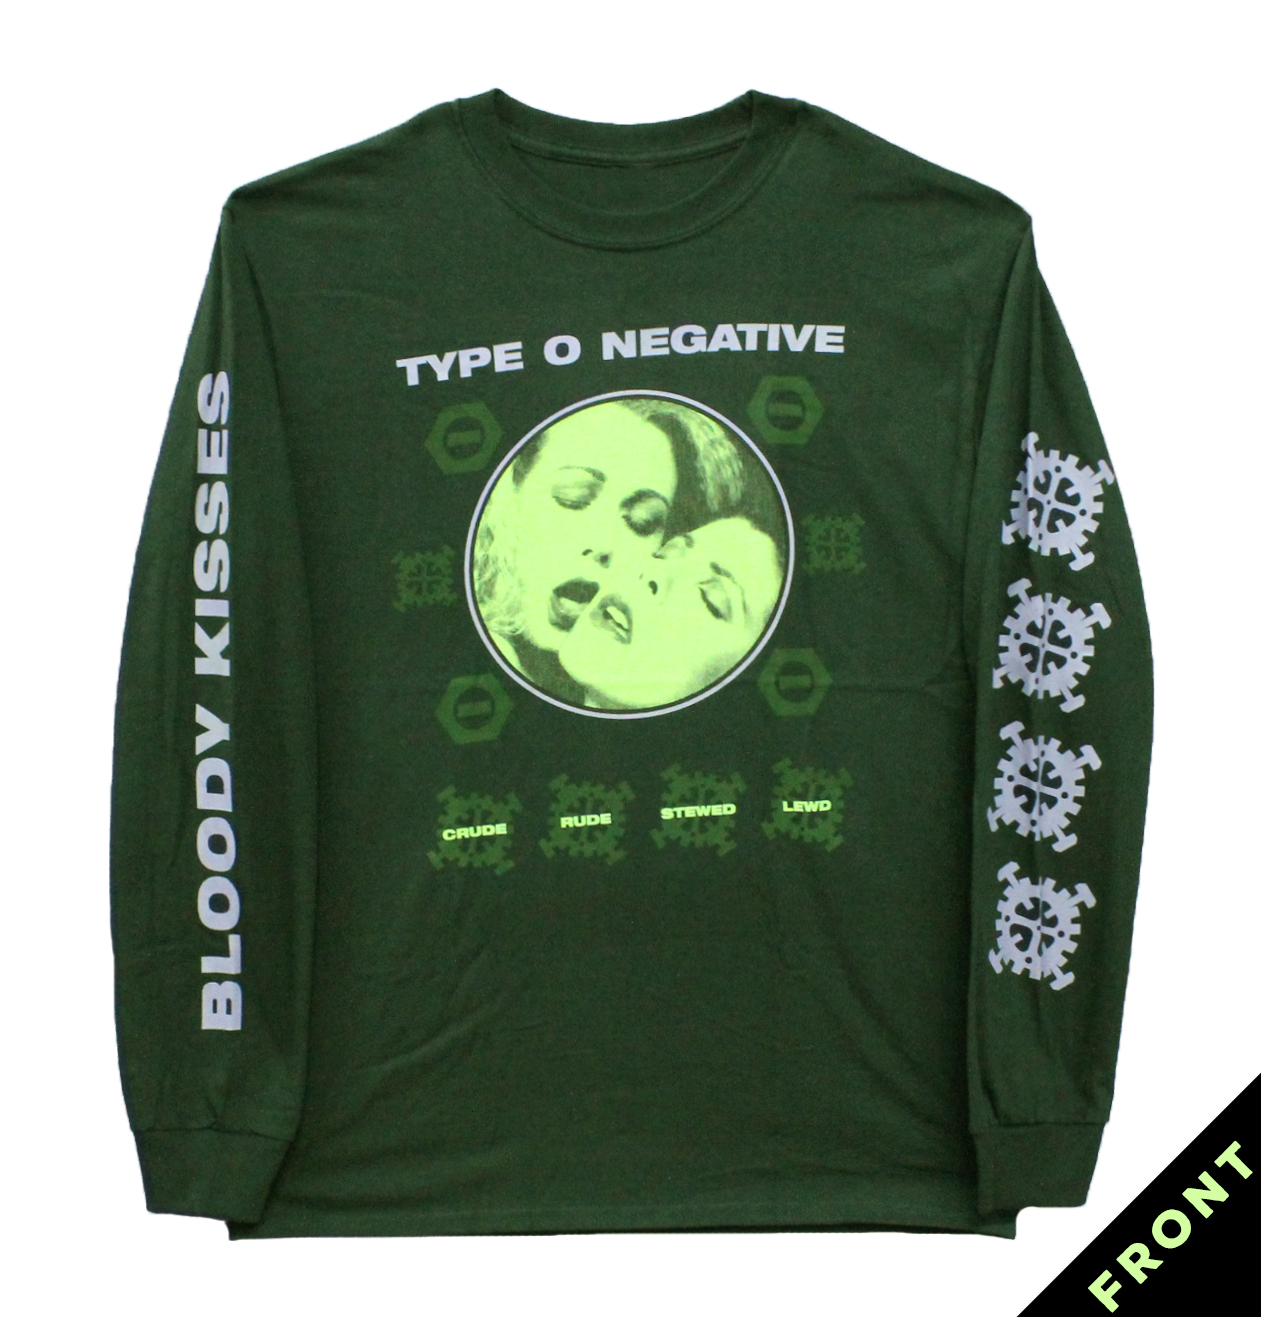 Black NEW & OFFICIAL! LS Shirt Type O Negative 'Crude Gears'